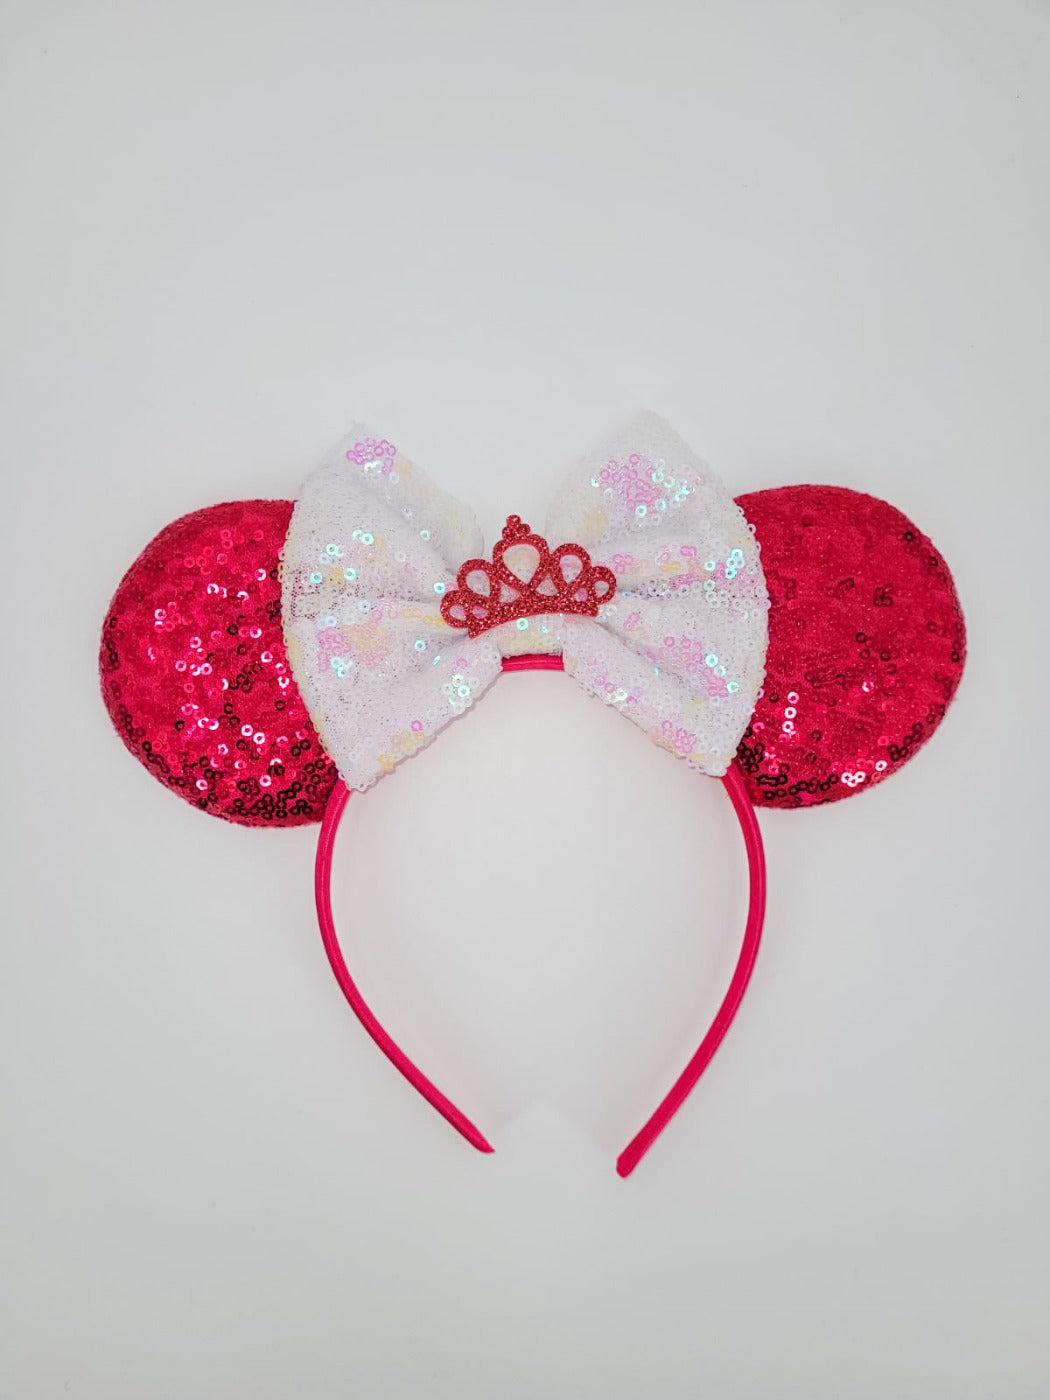 Hot Pink Princess Themed Sequined Headband with White Sequined Bow